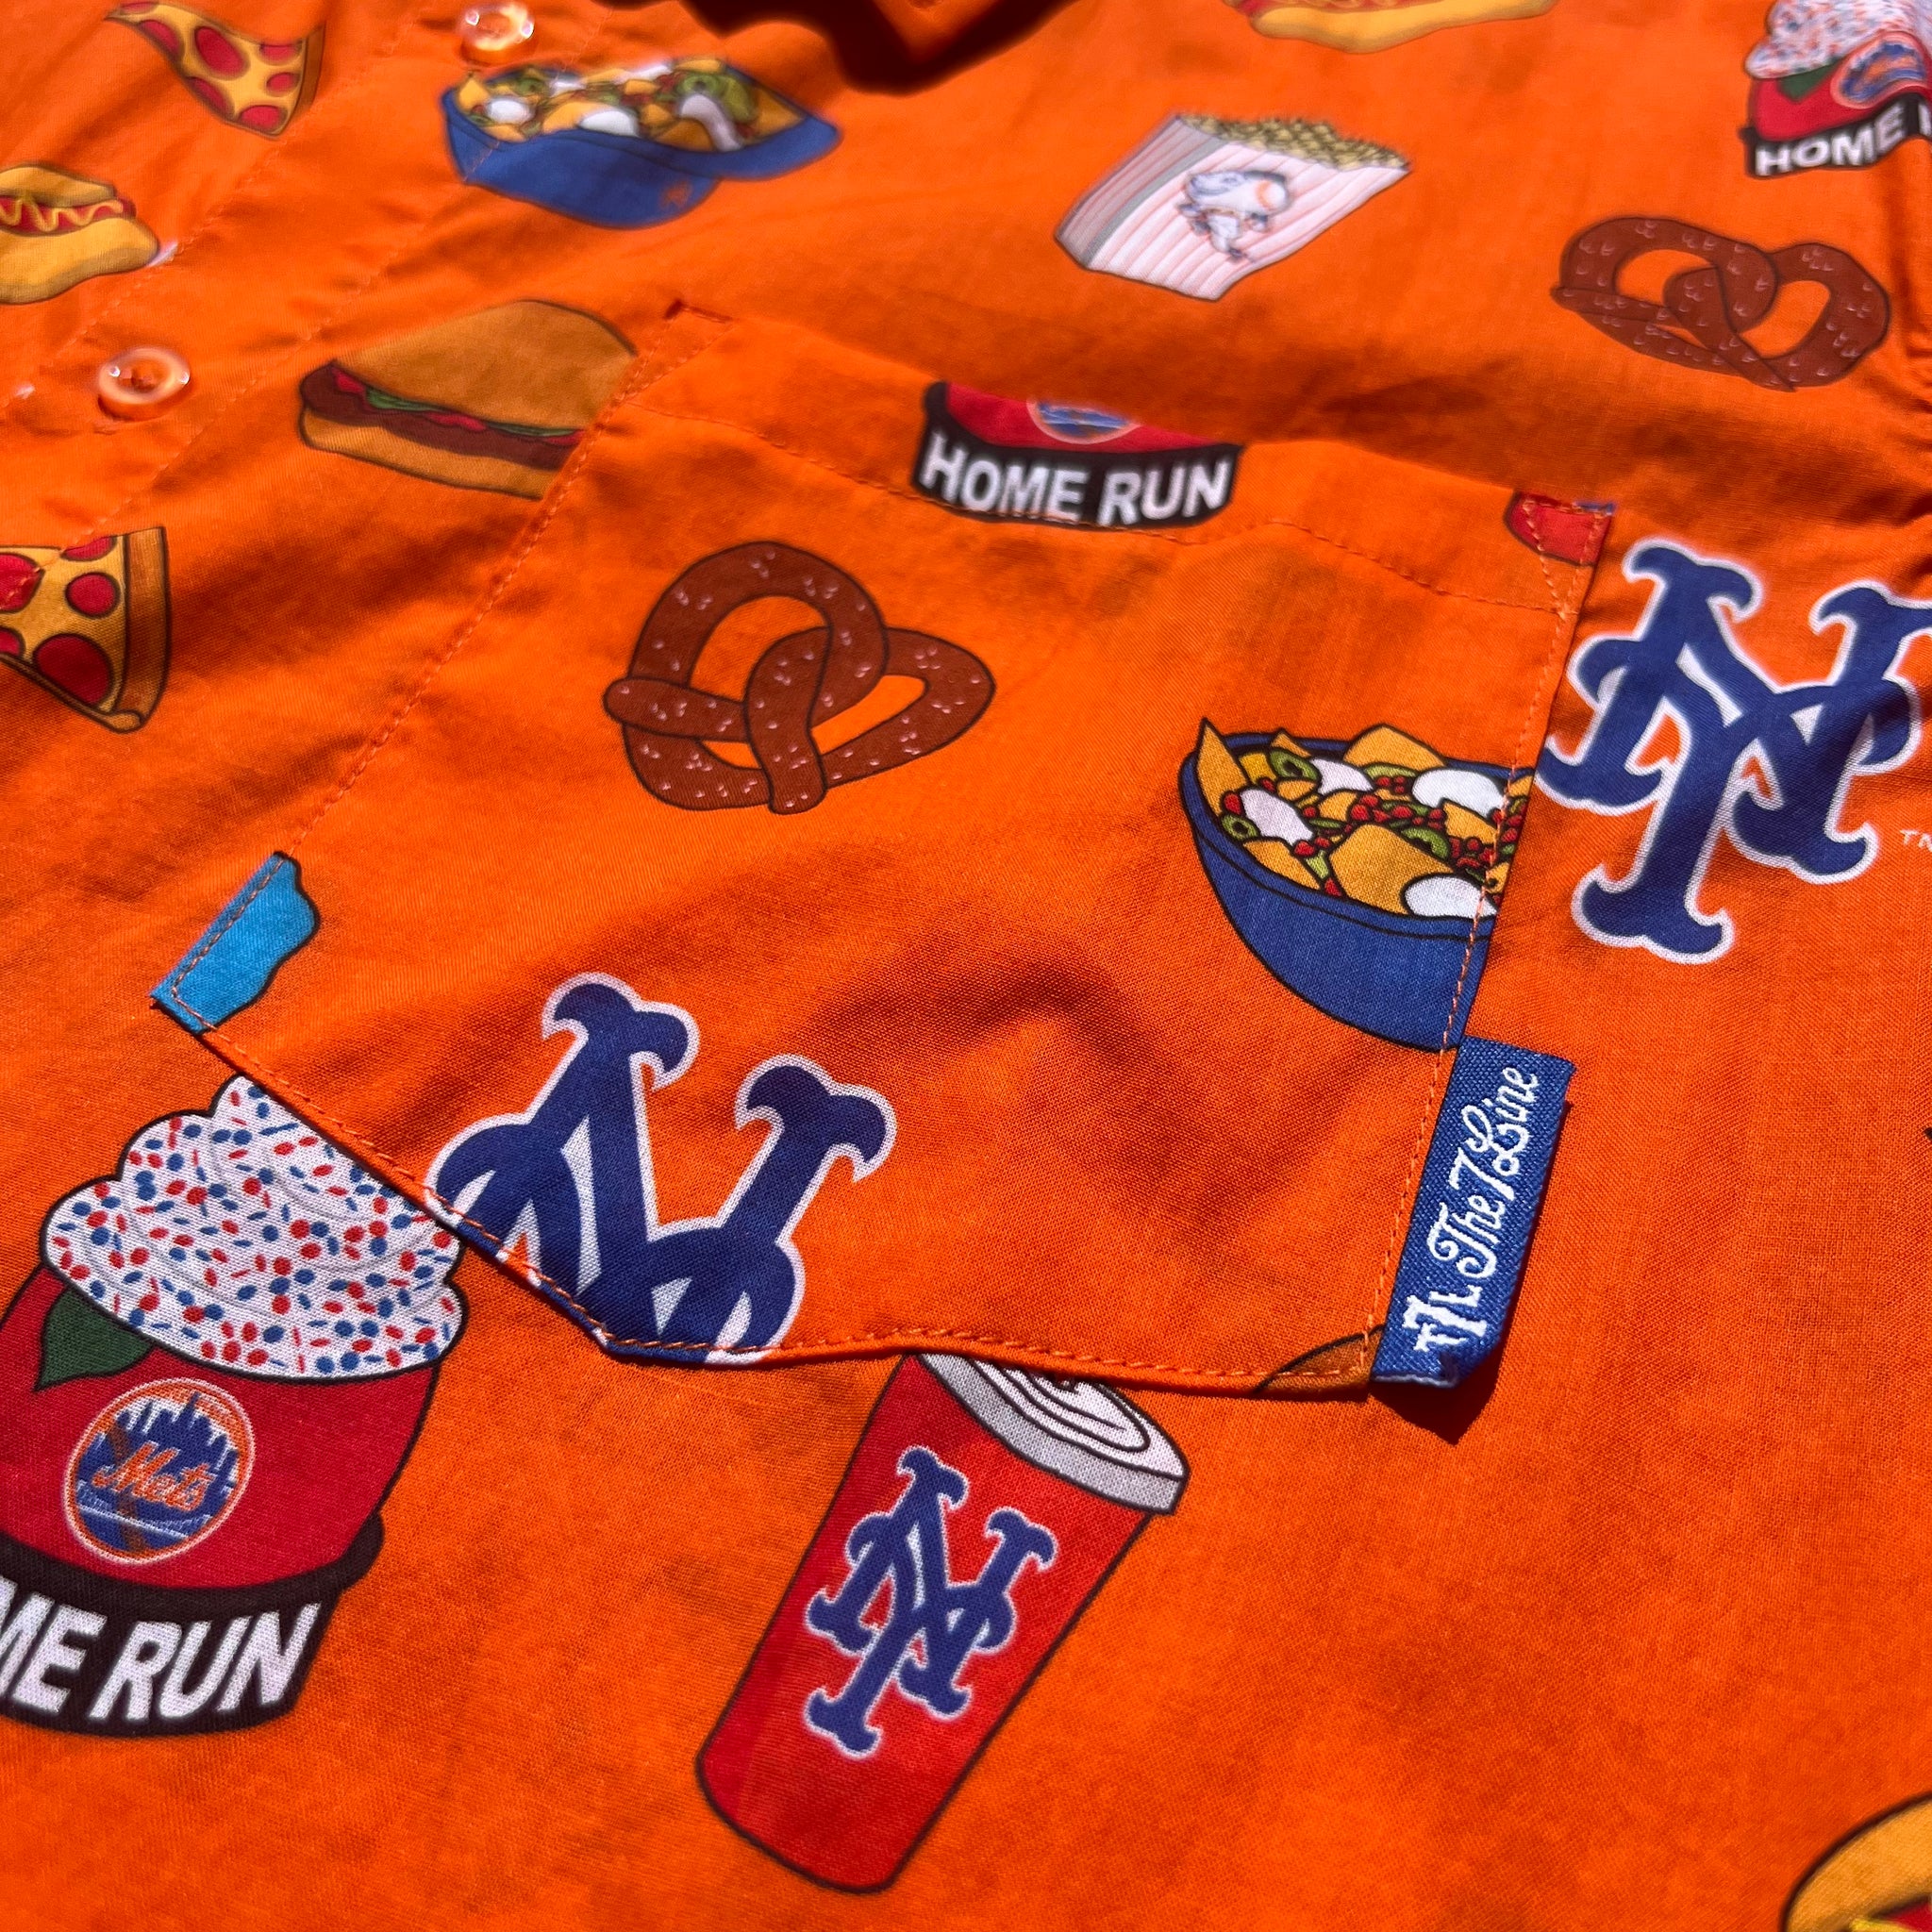 New York Mets - Get ready to bring it, #Mets fans.